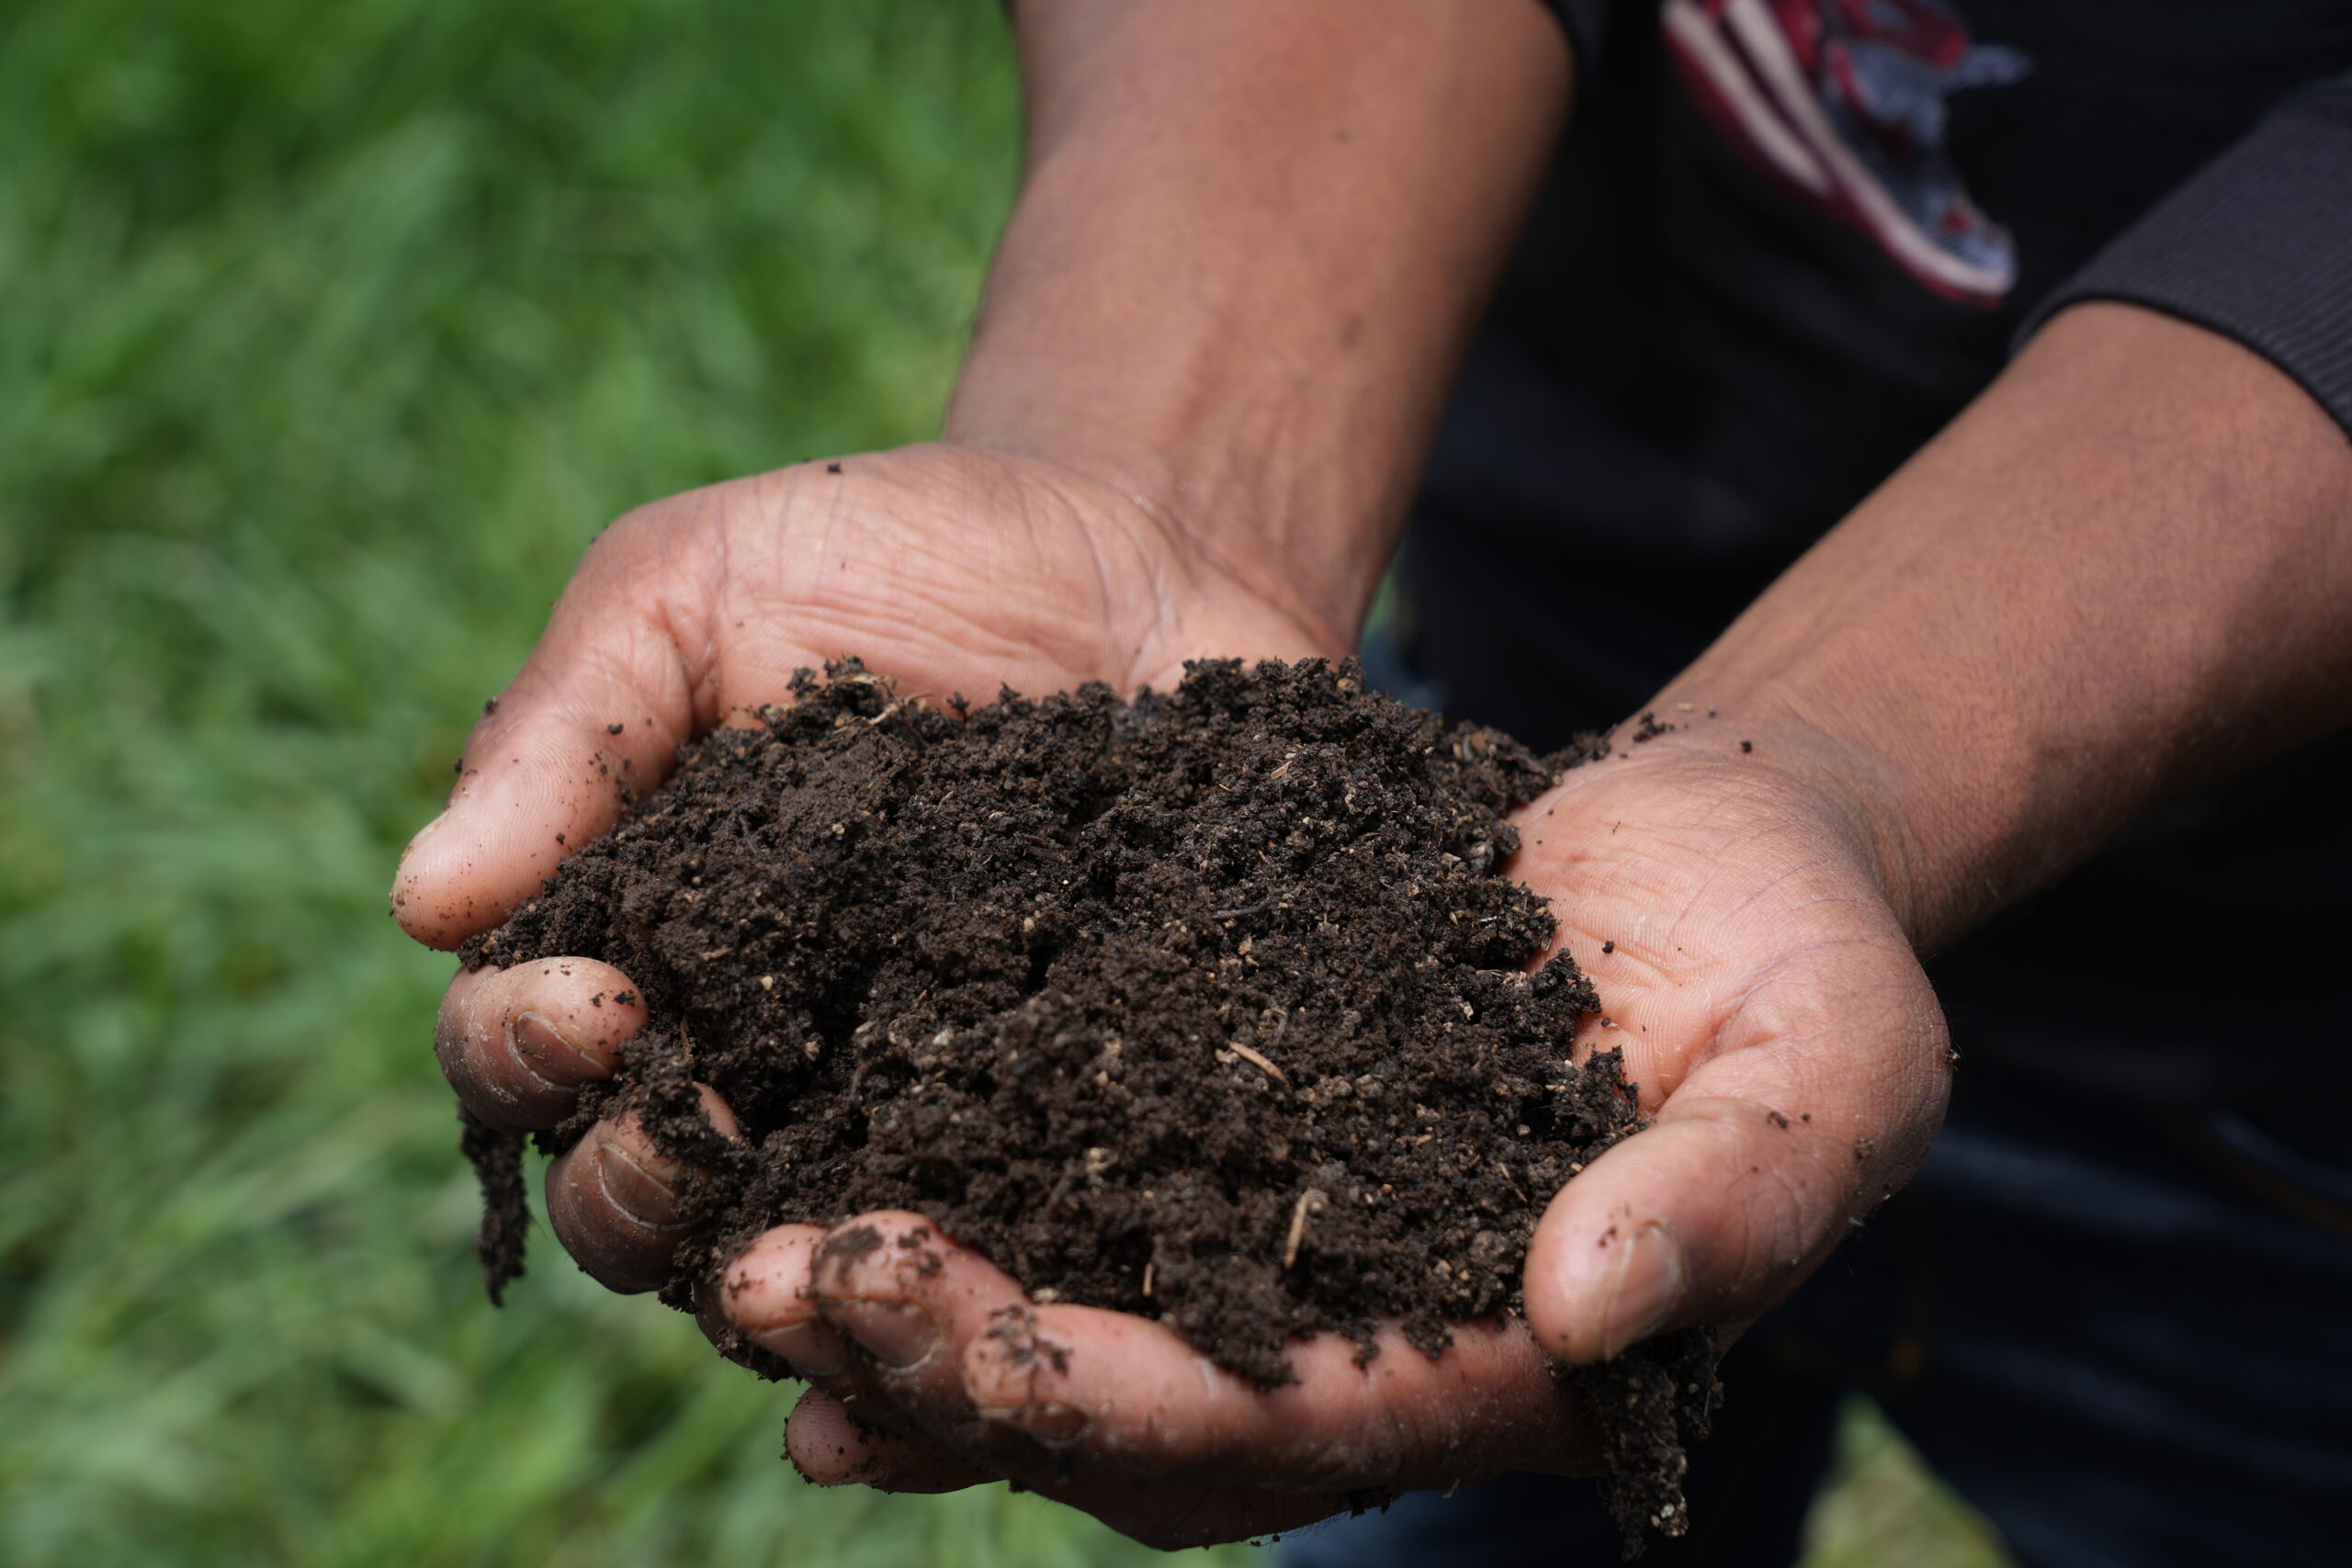 Person holding a handful of dark, nutrient-rich soil with both hands. Green grass is visible in the background.